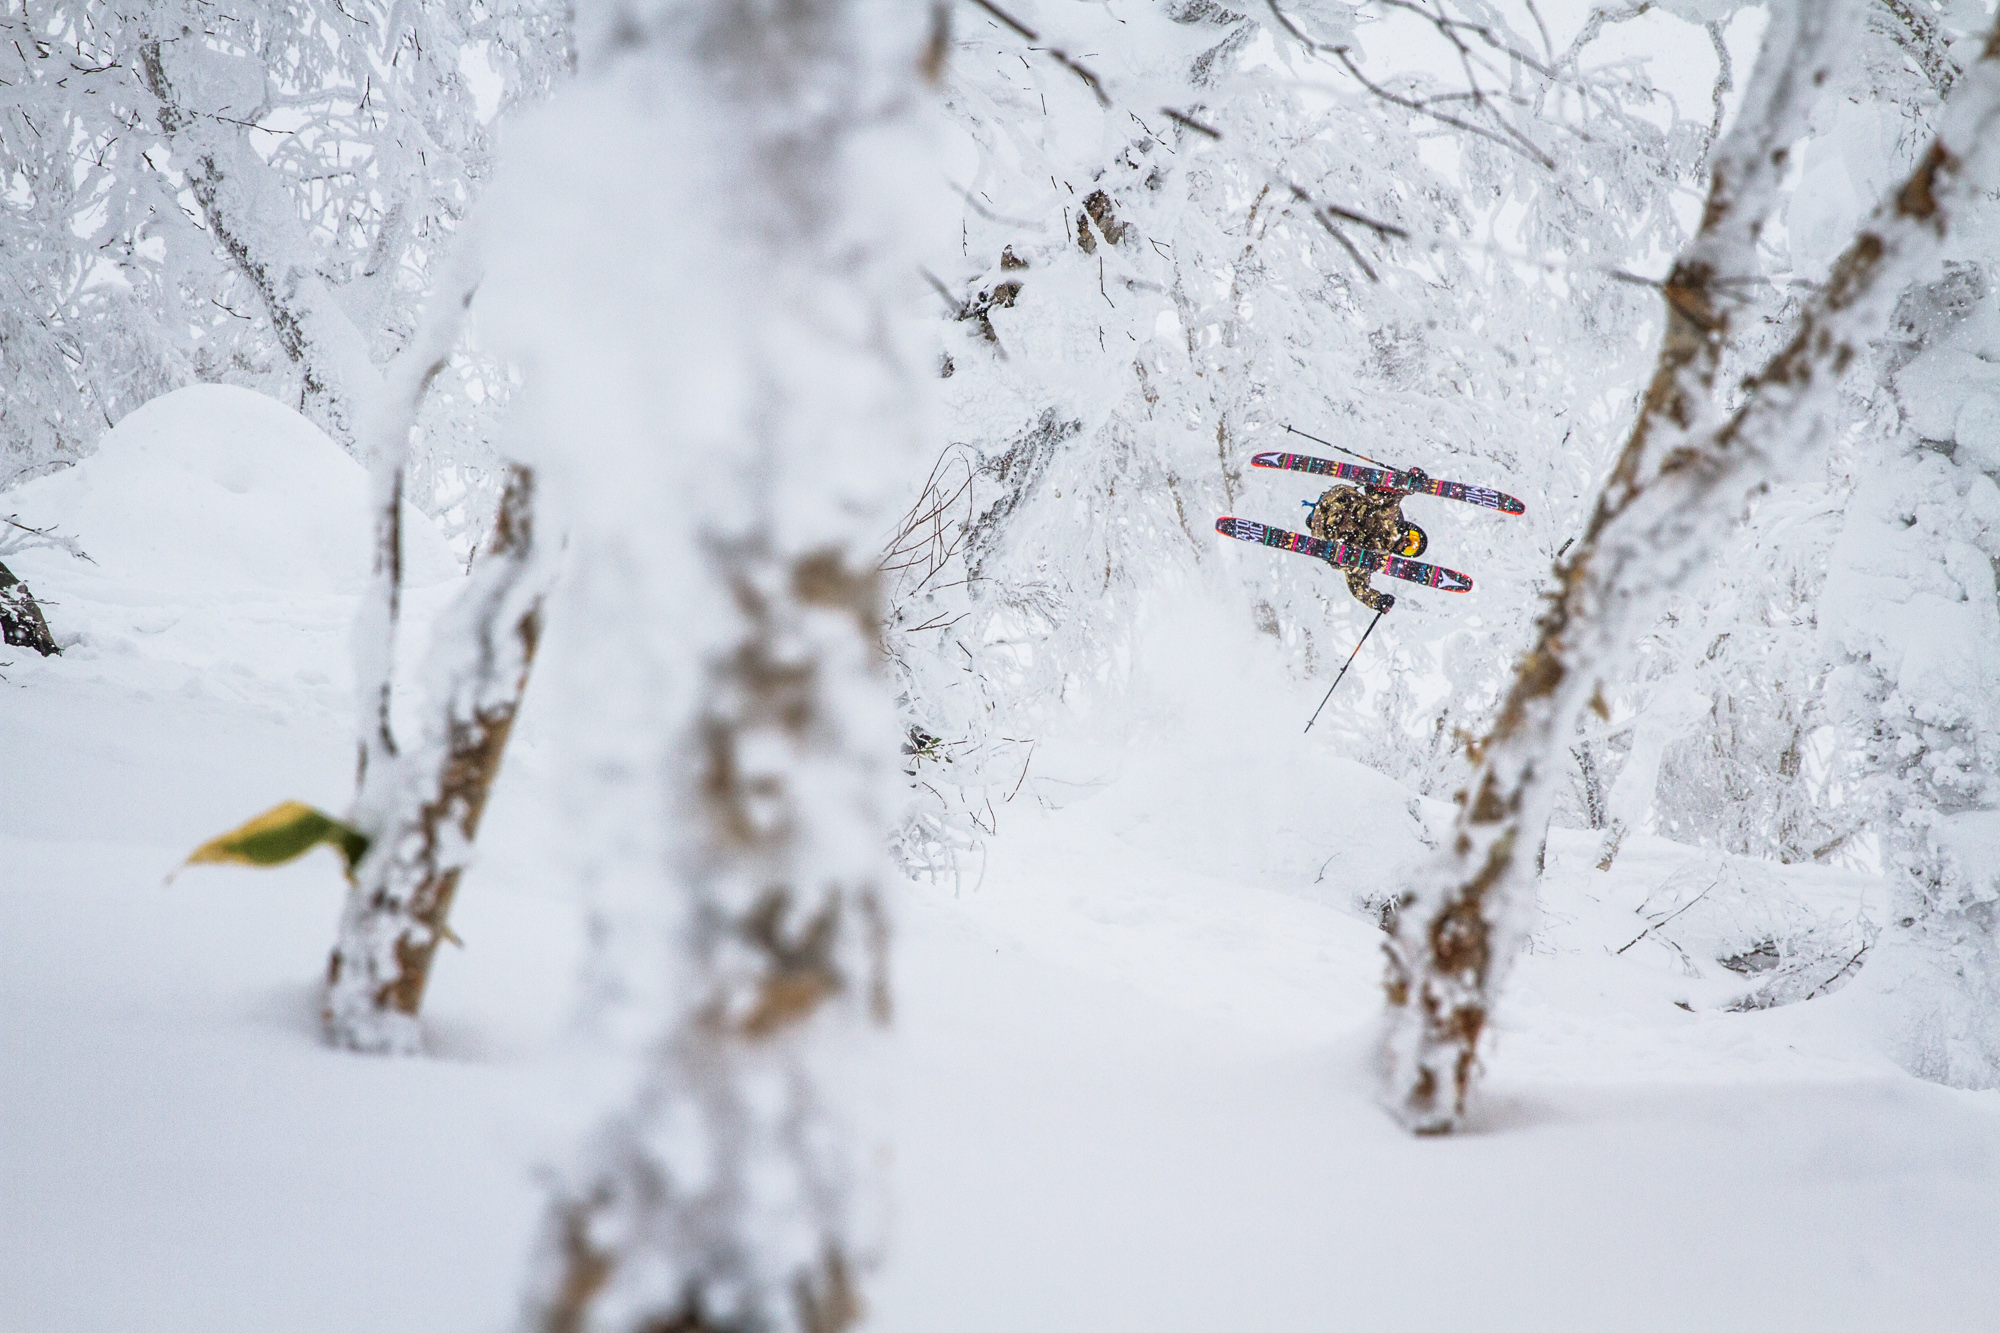 Nicky Keefer launches a cork 360 through the trees in Rusutsu, Japan.